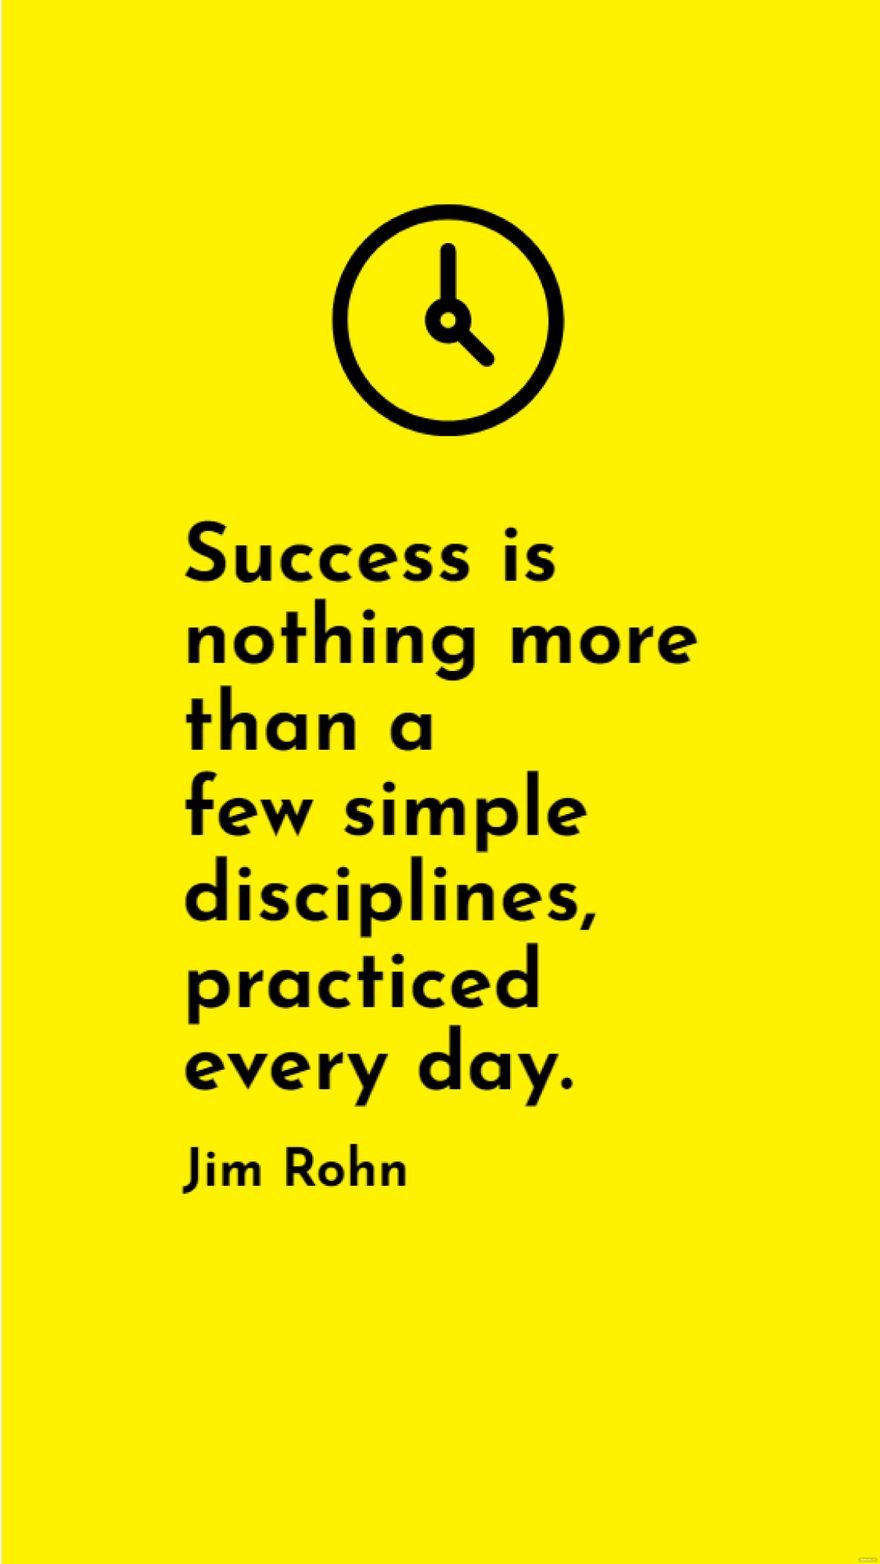 Free Jim Rohn - Success is nothing more than a few simple disciplines, practiced every day.